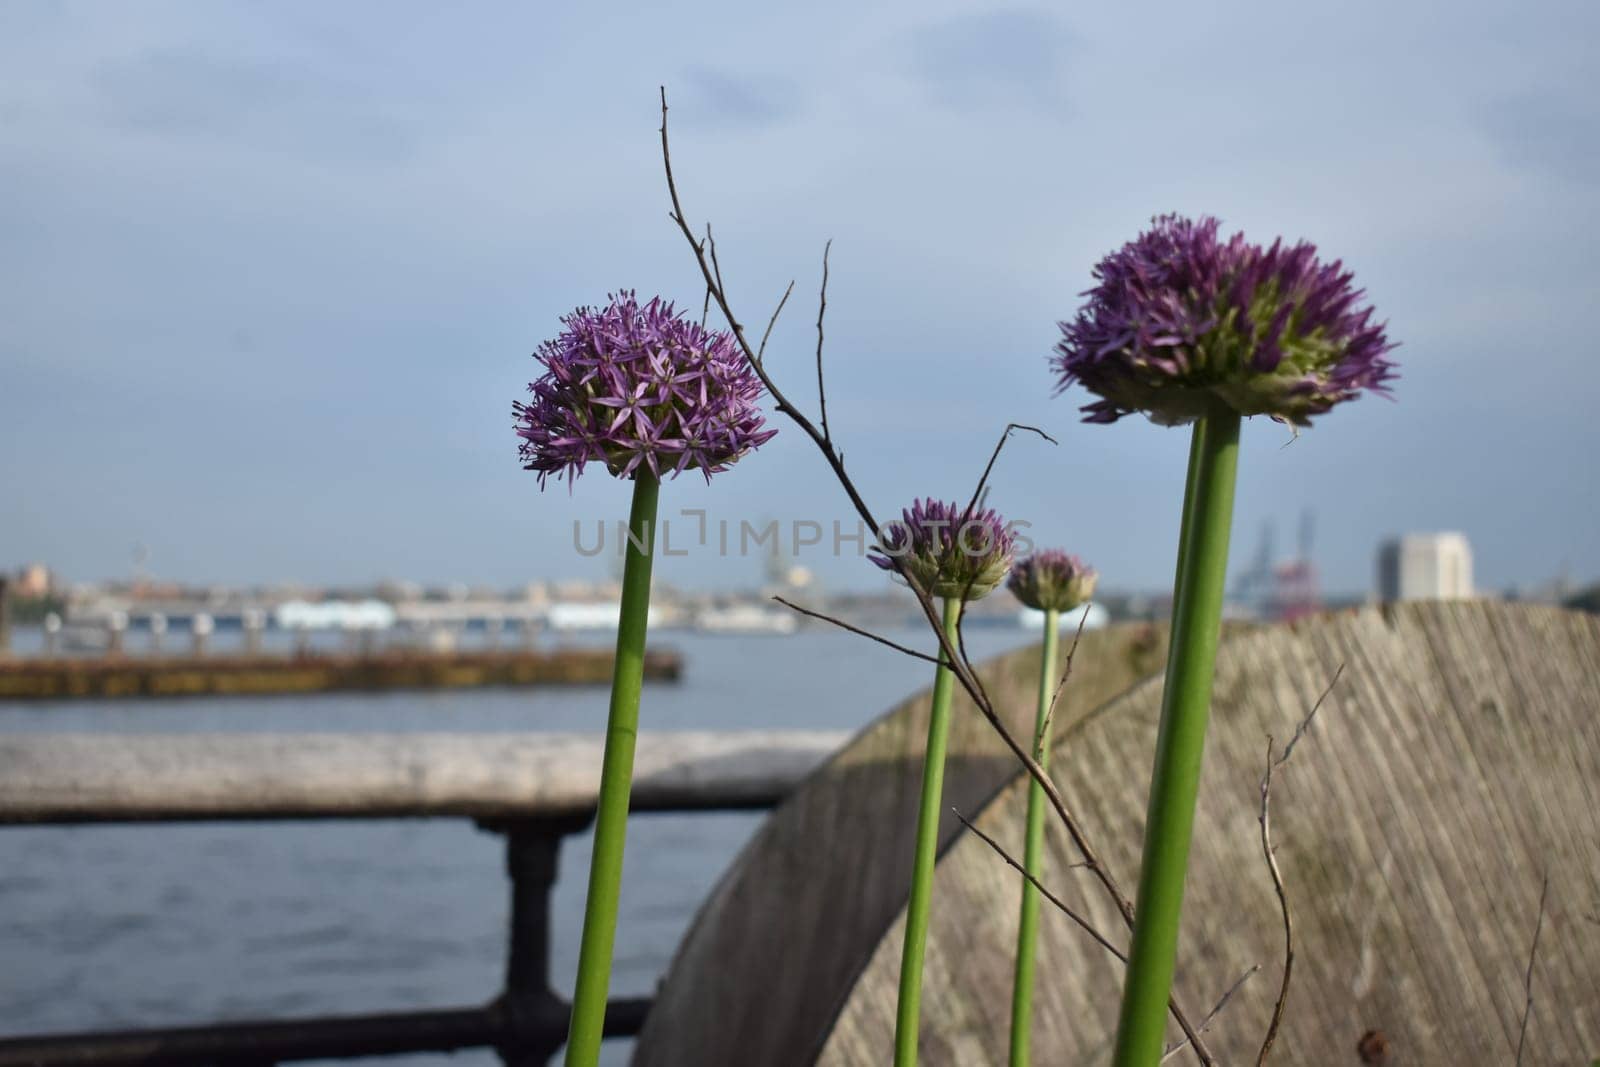 Giant Ornamental Onion Purple Flower Plants Blooming in New York. High quality photo